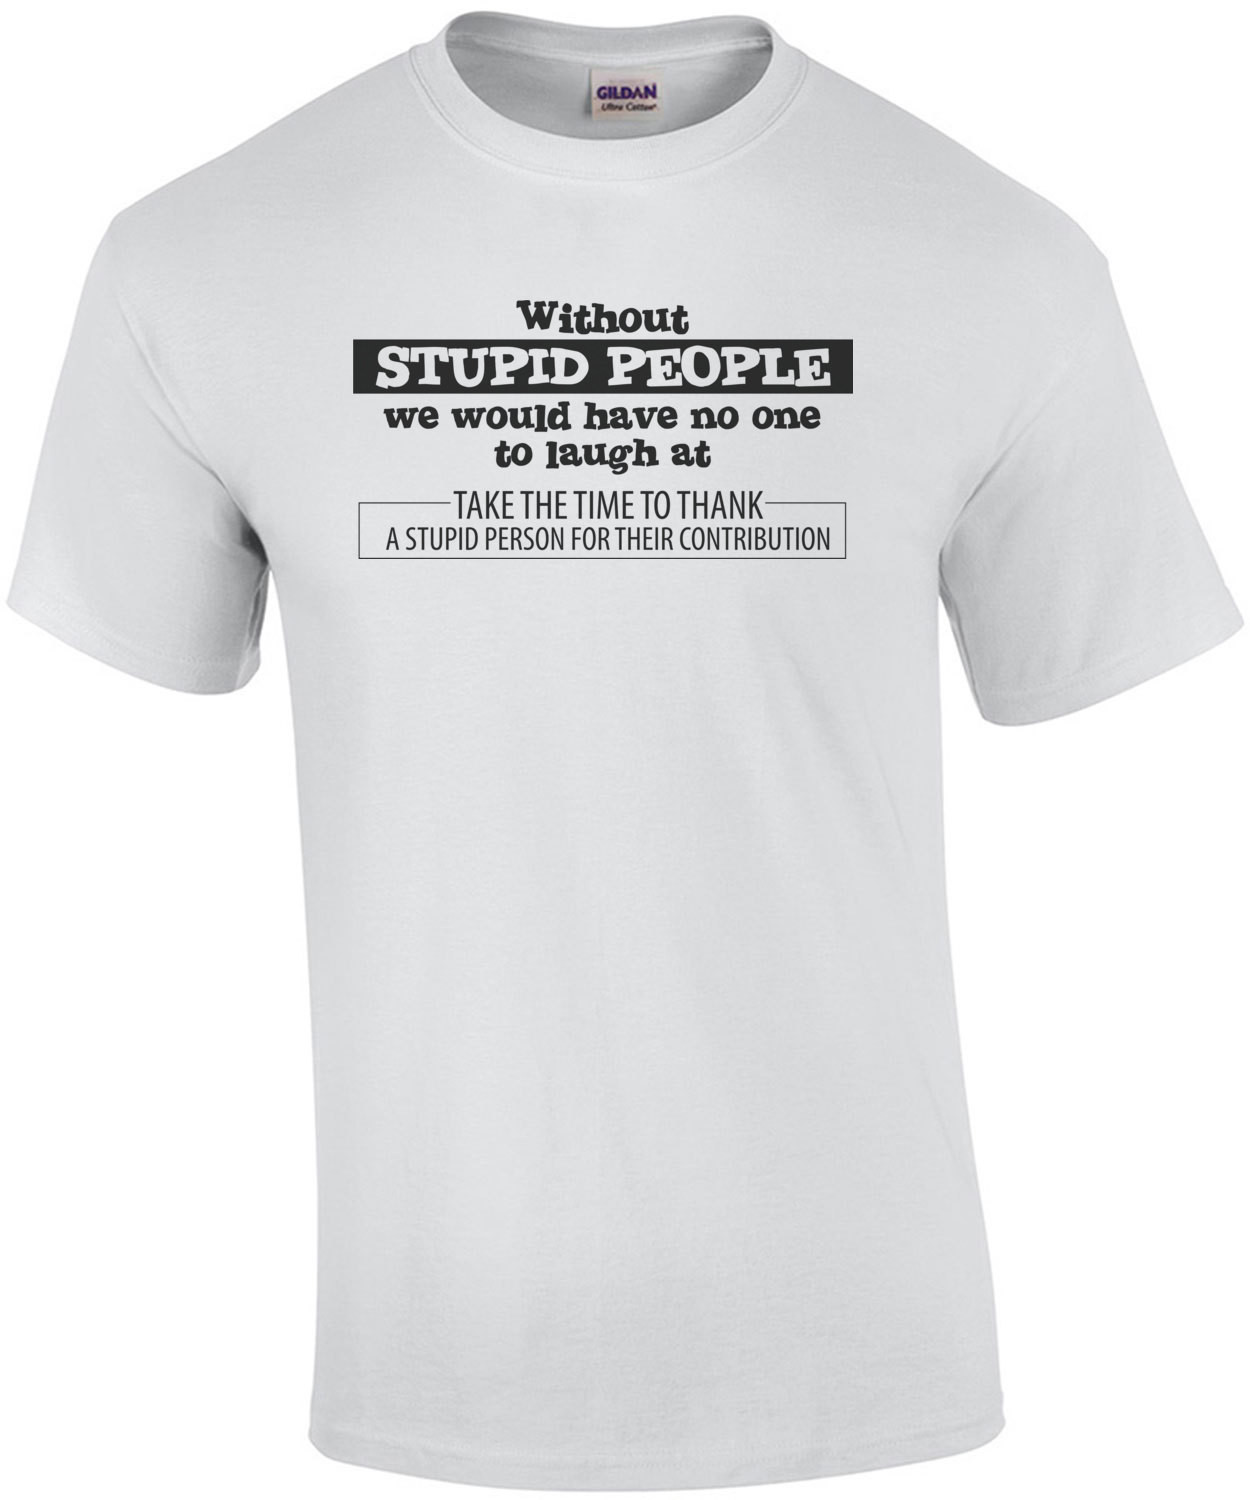 Without Stupid People we would have no one to laugh at. Funny T-Shirt